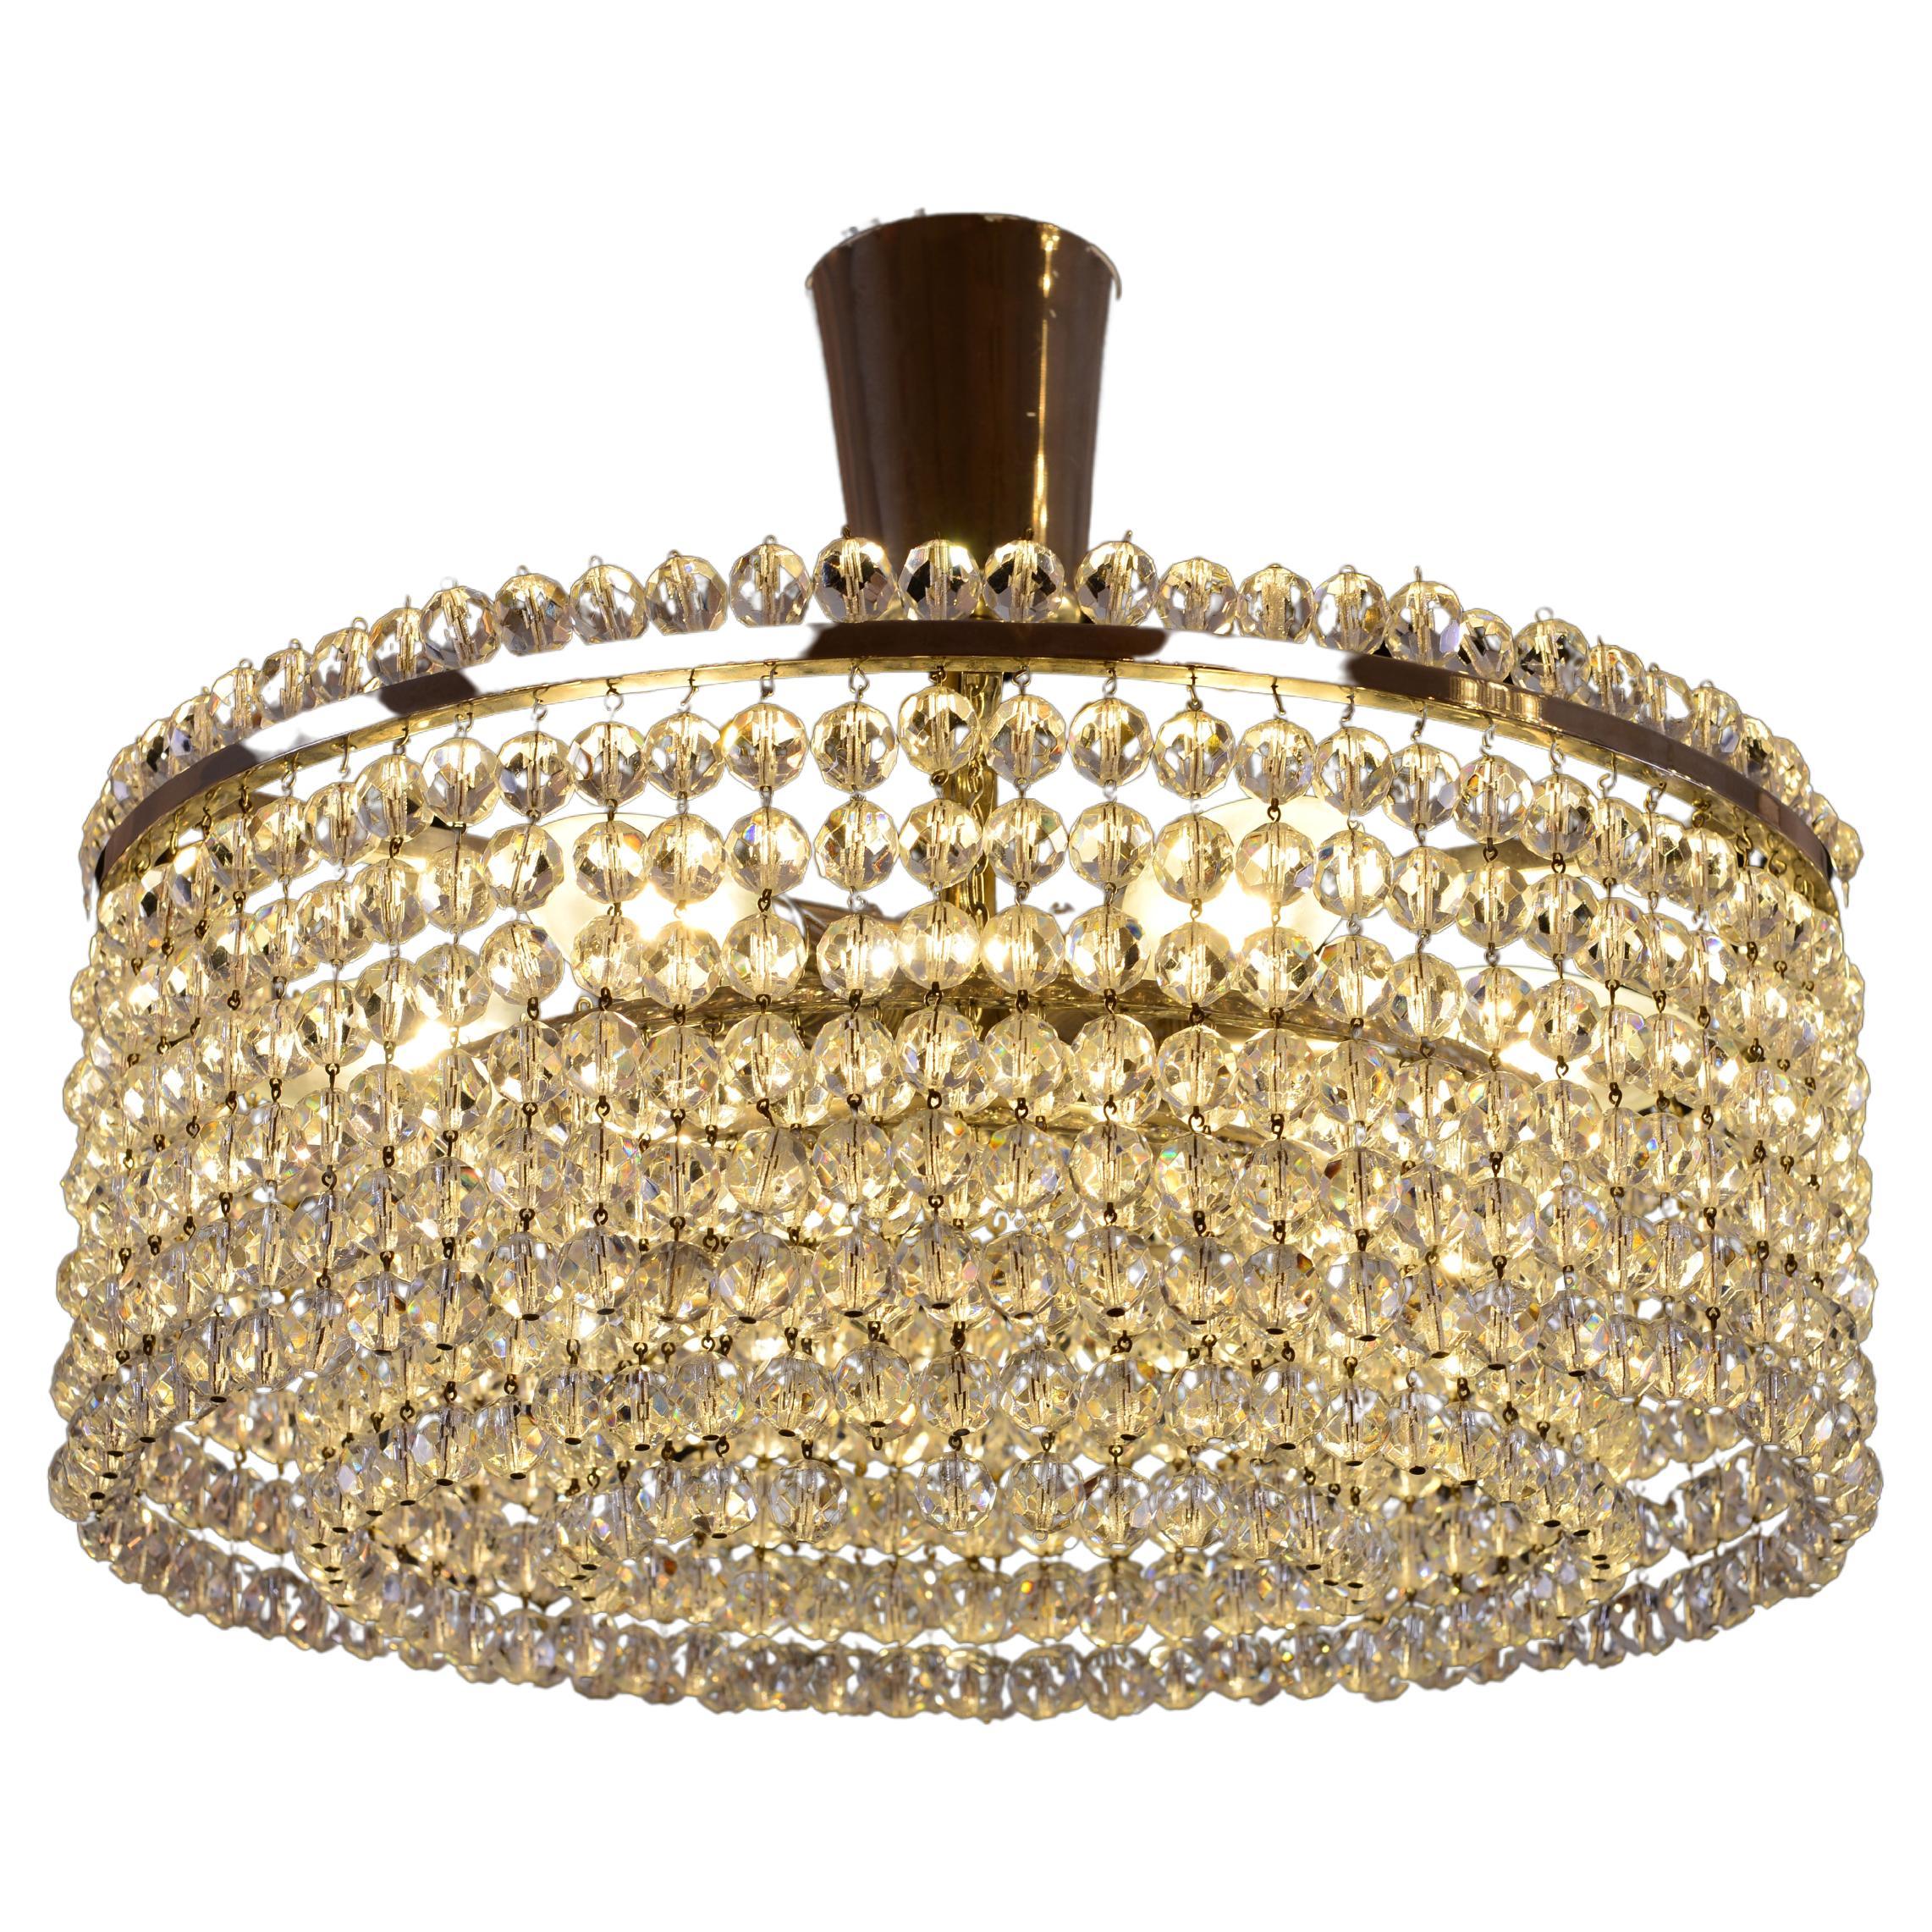 A very modern and stylish chandelier with hand-cut crystal balls in three layers and six bulbs, with the name 